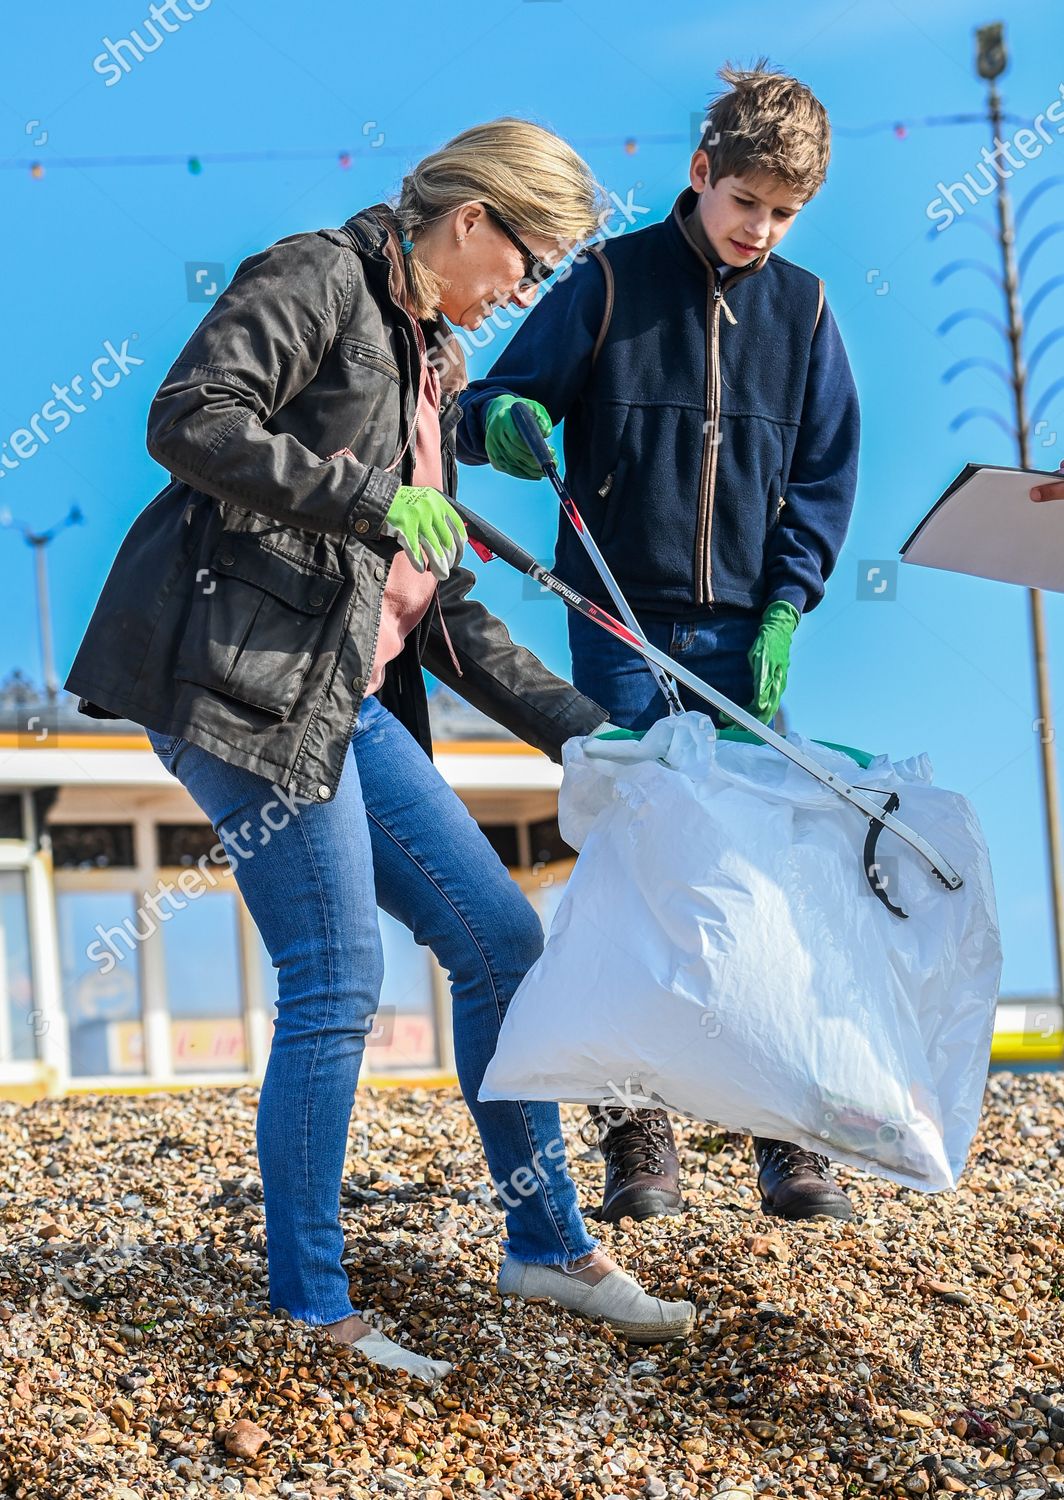 prince-edward-and-sophie-countess-of-wessex-great-british-beach-clean-southsea-beach-portsmouth-uk-shutterstock-editorial-10782998dw.jpg